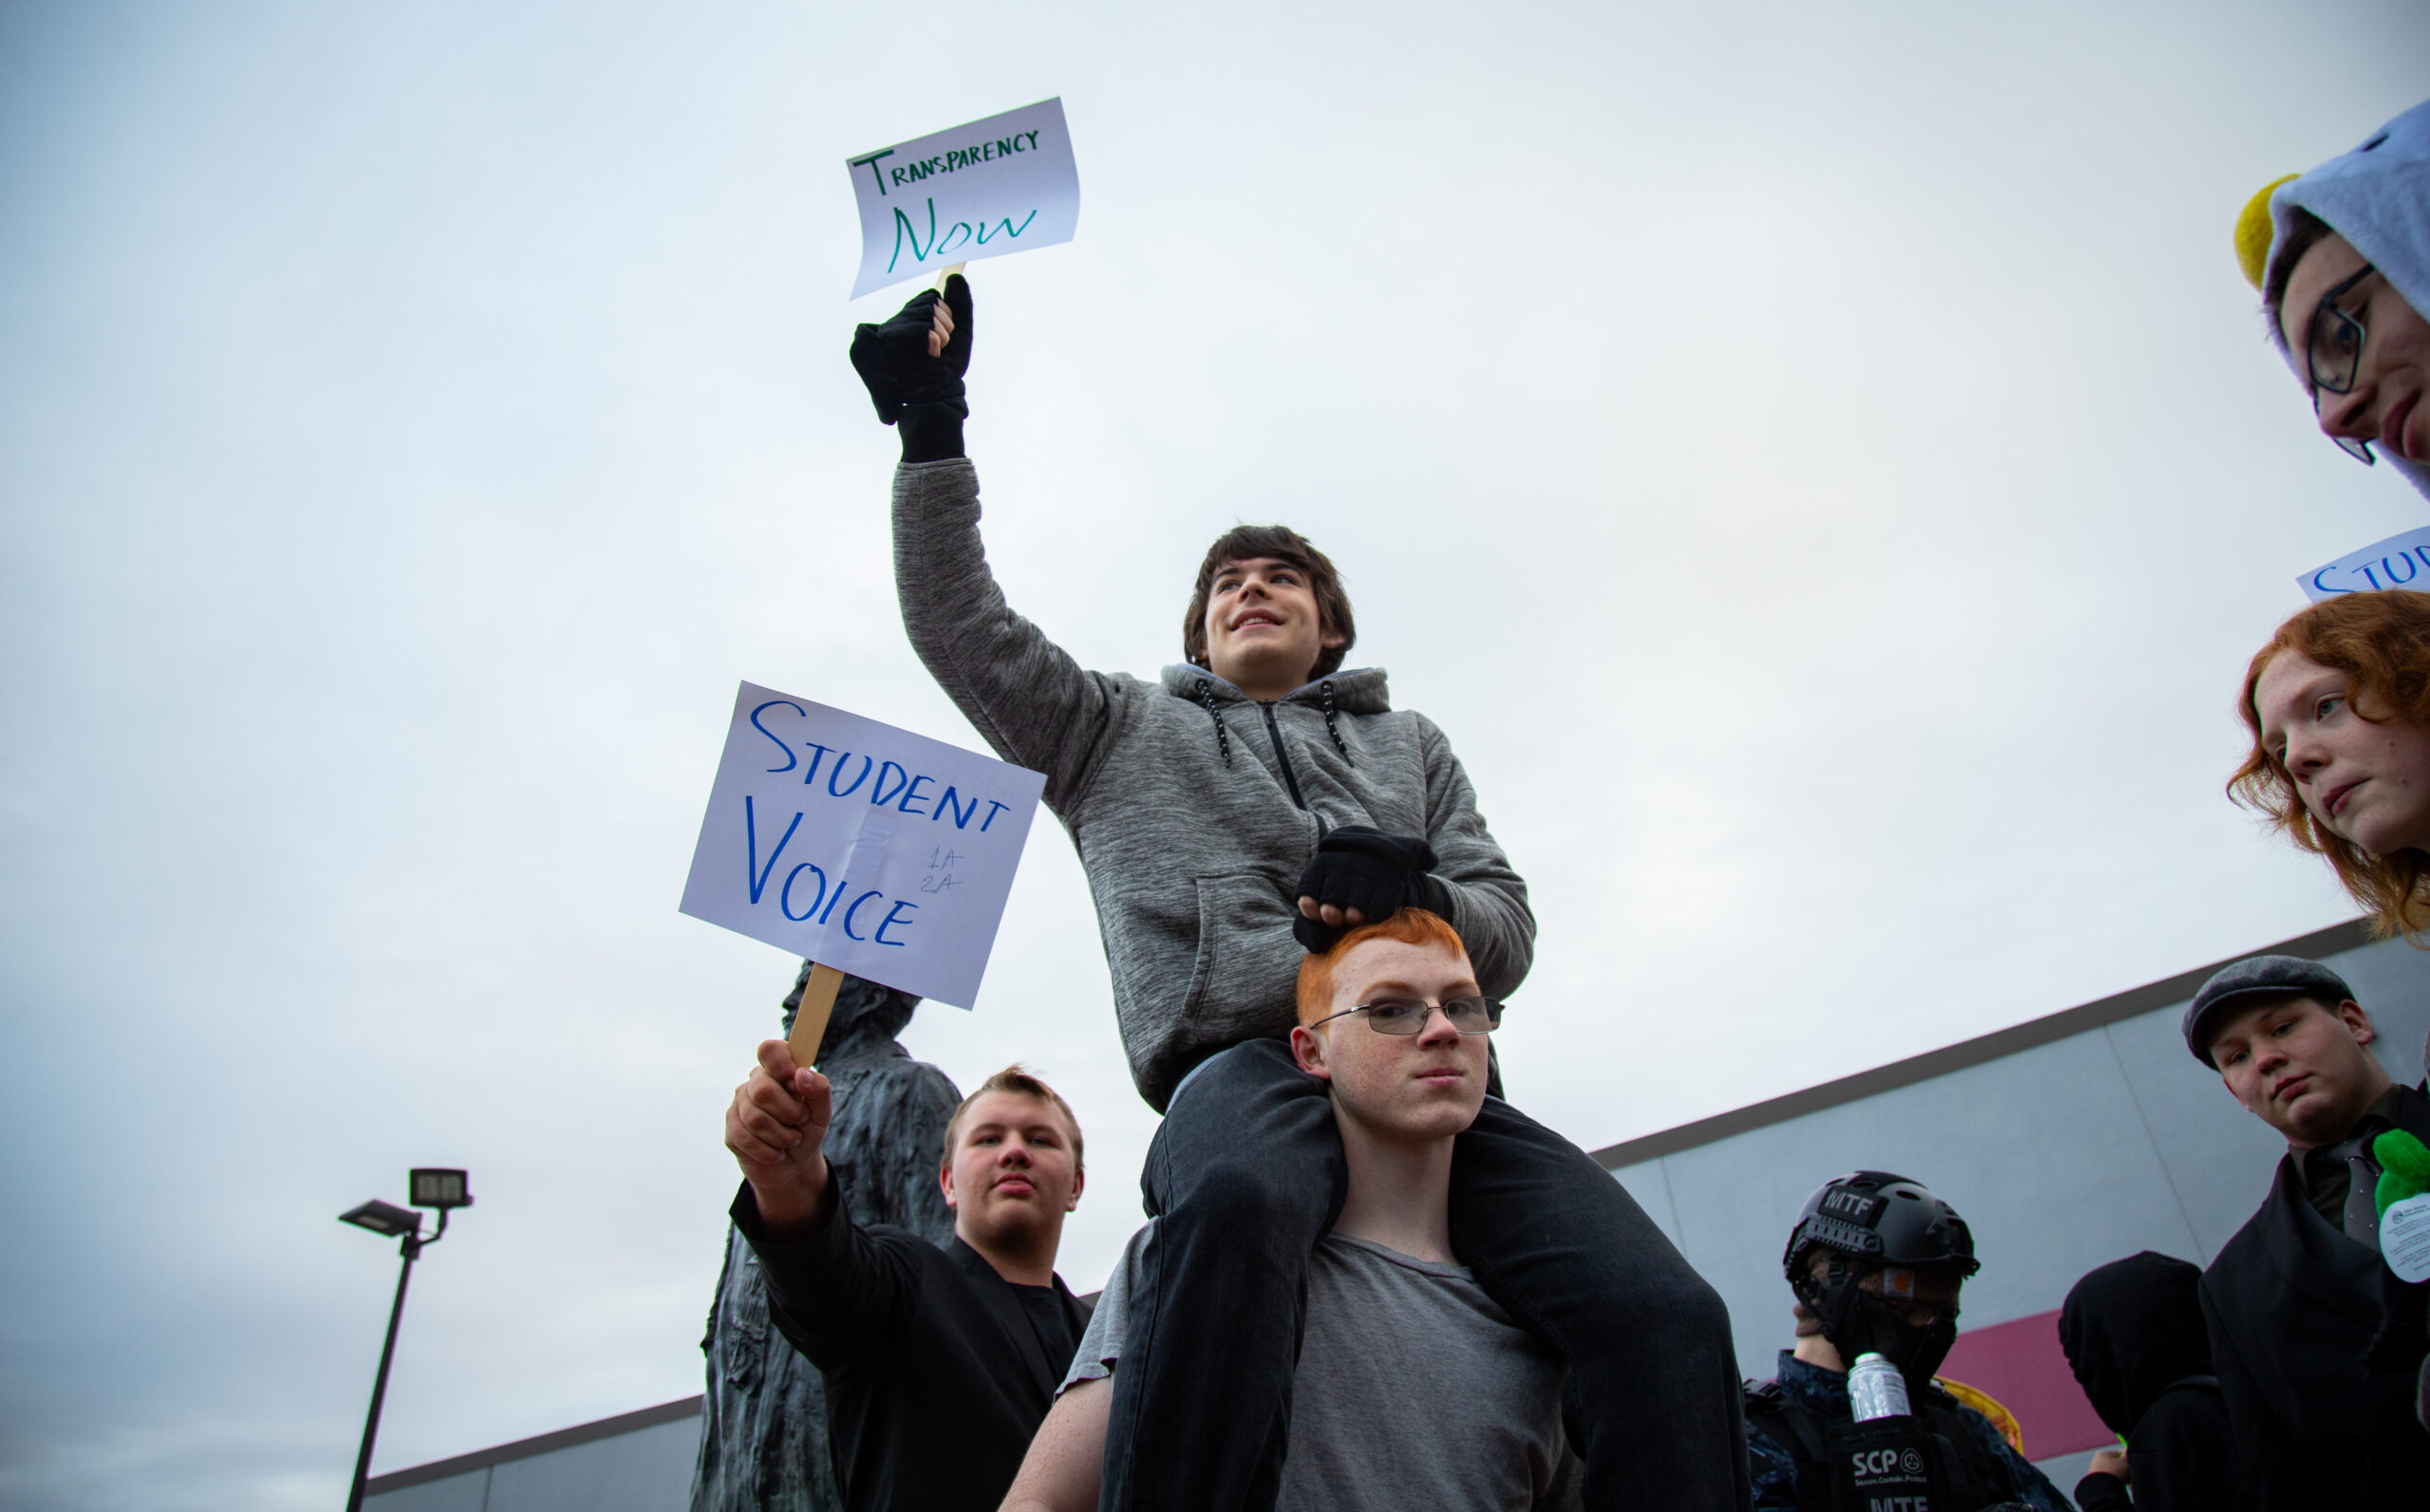 One student holding a sign sits on the shoulders of another student during a walkout to protest recent school board decisions at Wasilla High School.